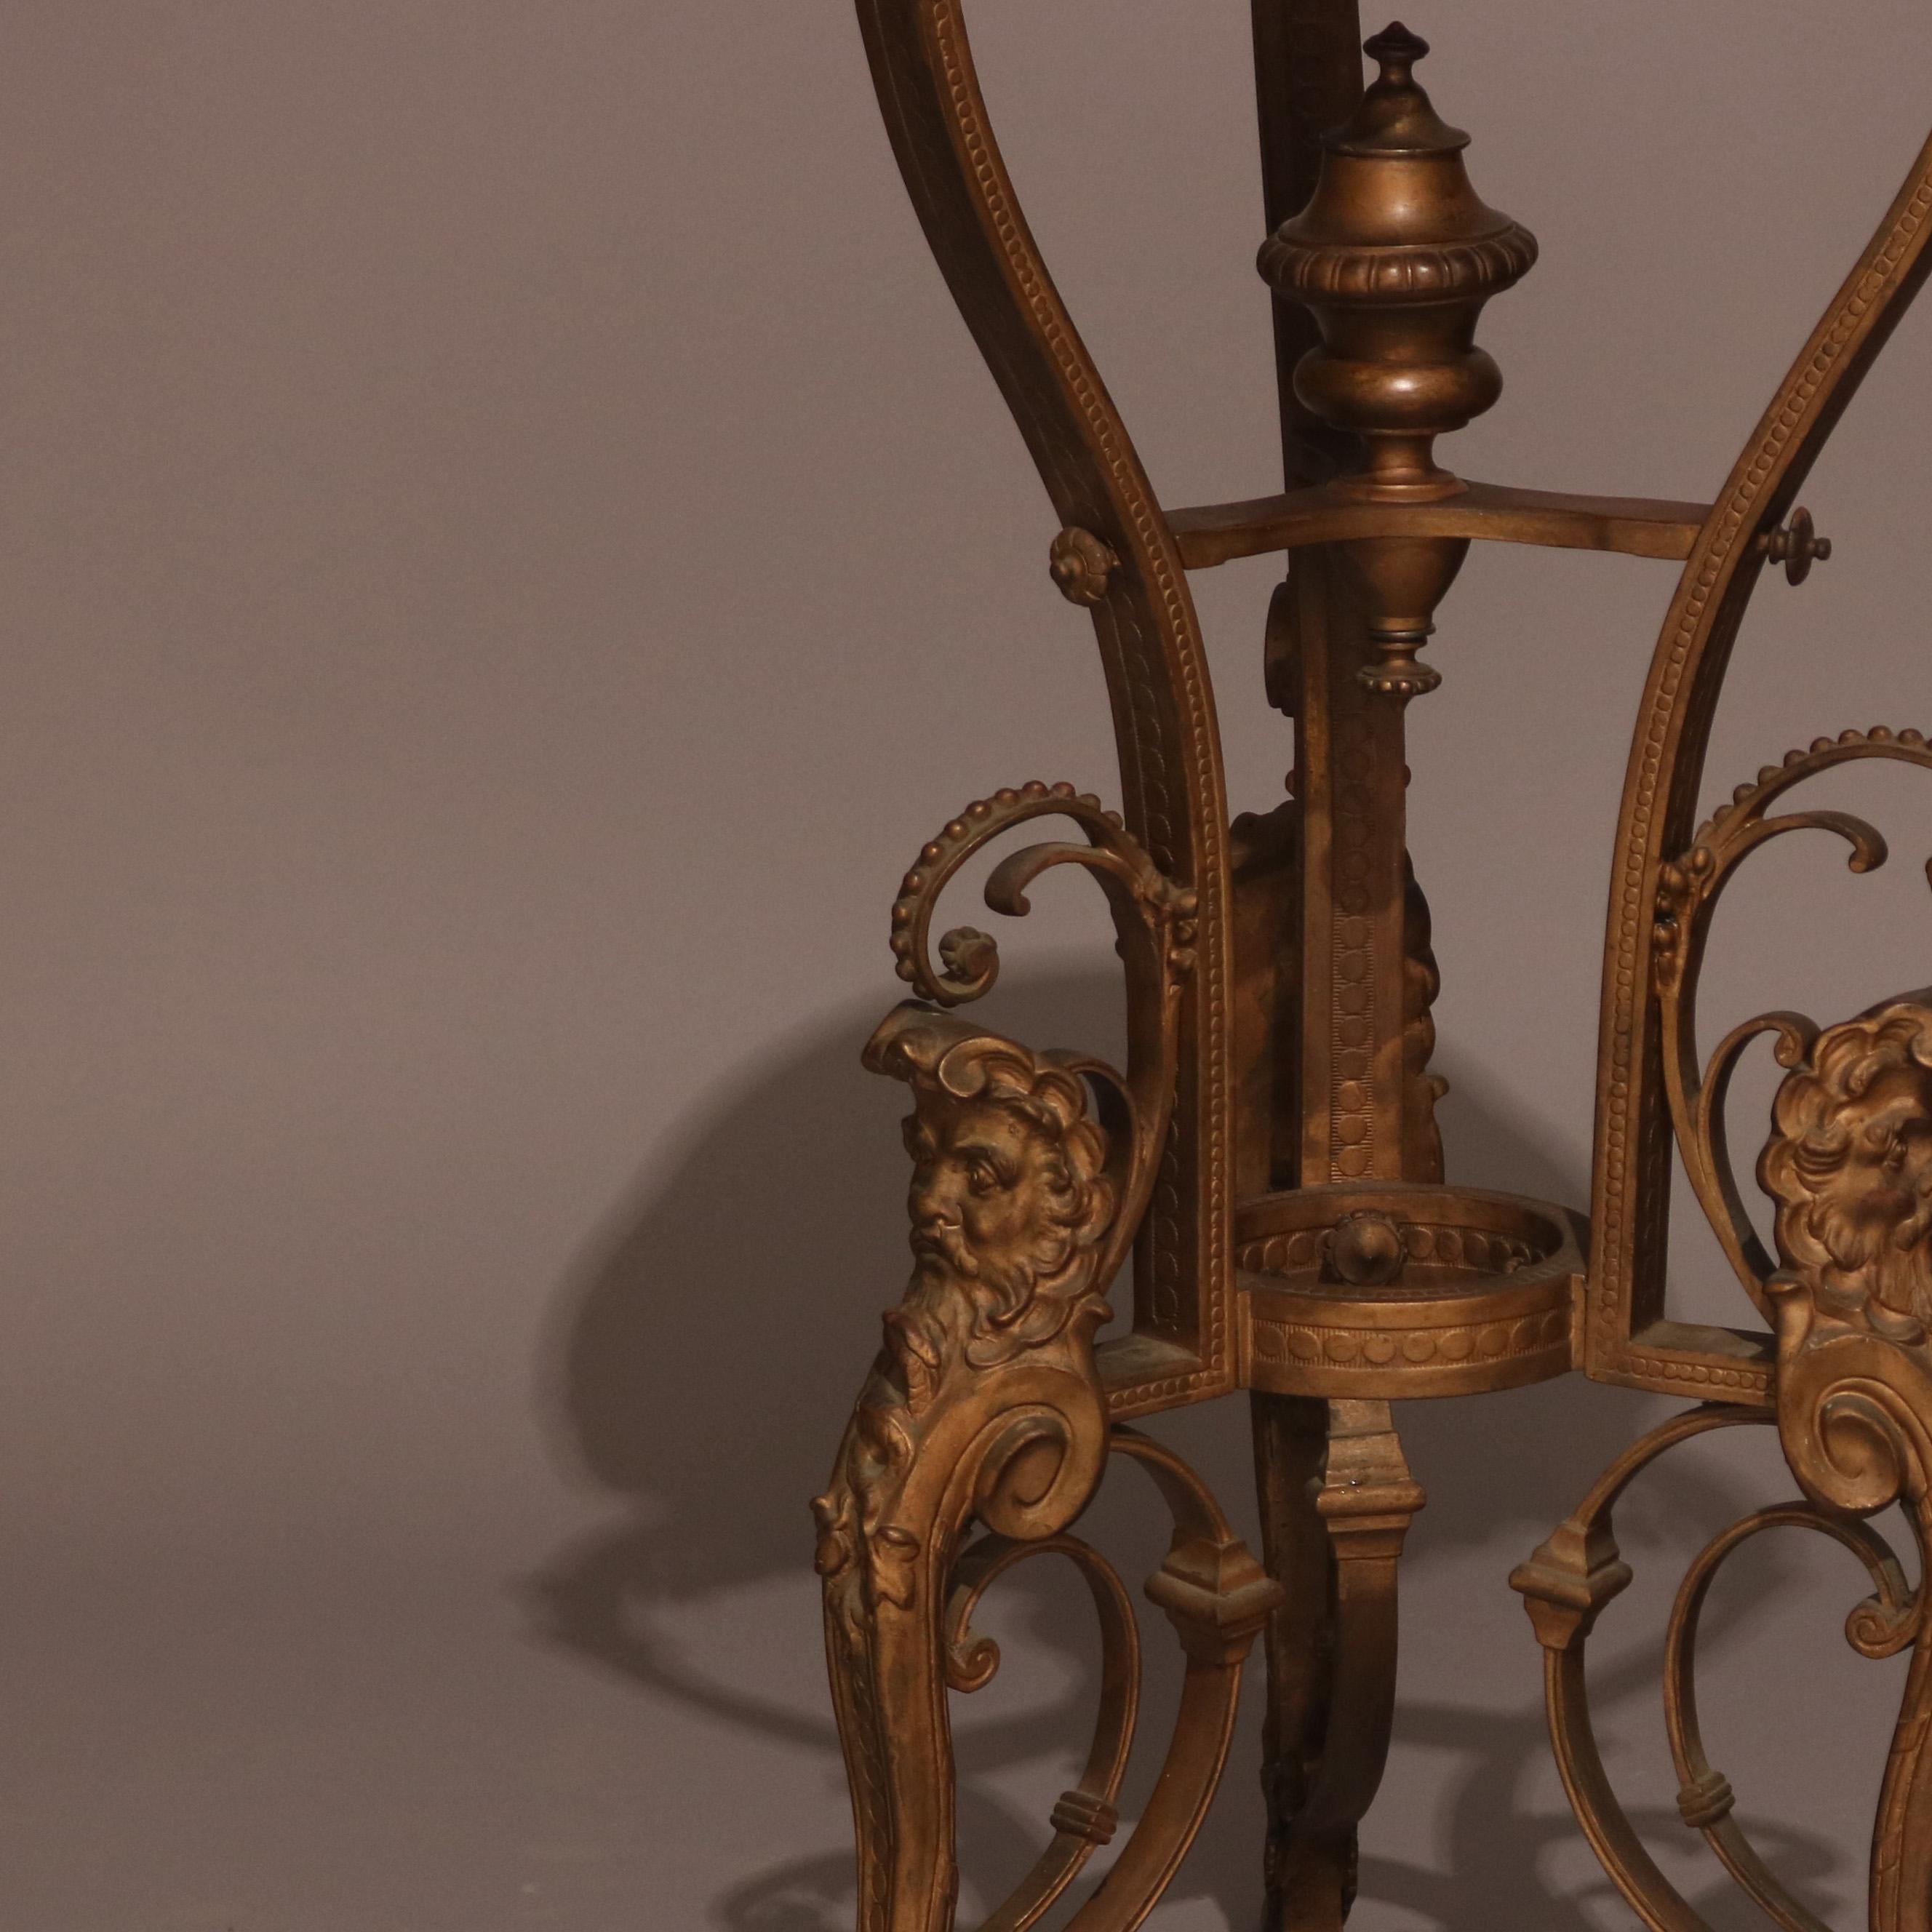 An antique French figural sculpture stand features cast gilt metal structure with marble top seated in frame with foliate border and surmounting scroll and foliate form tripod legs with sculptural masks, circa 1890.

Measures: 35.5